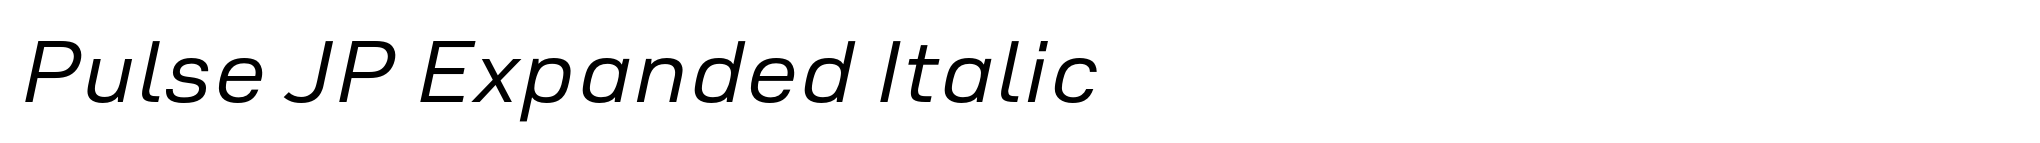 Pulse JP Expanded Italic image